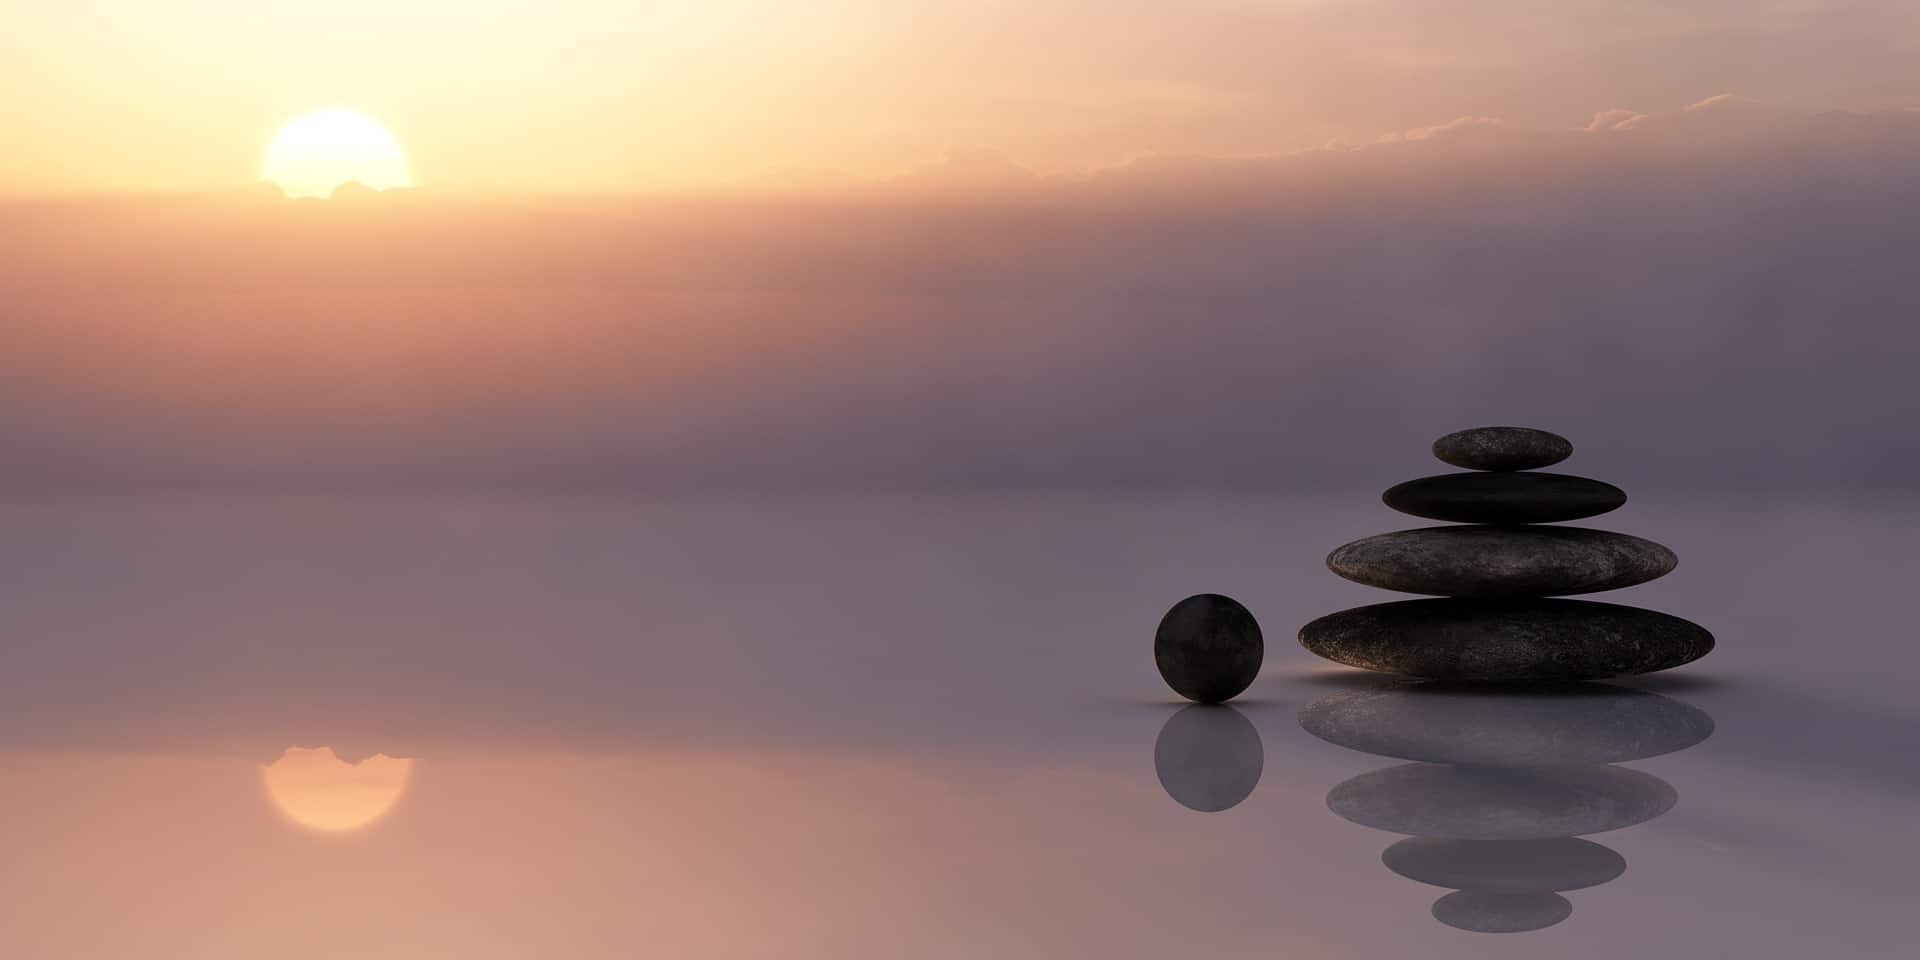 How to Use Guided Meditation for Calm and Mindfulness